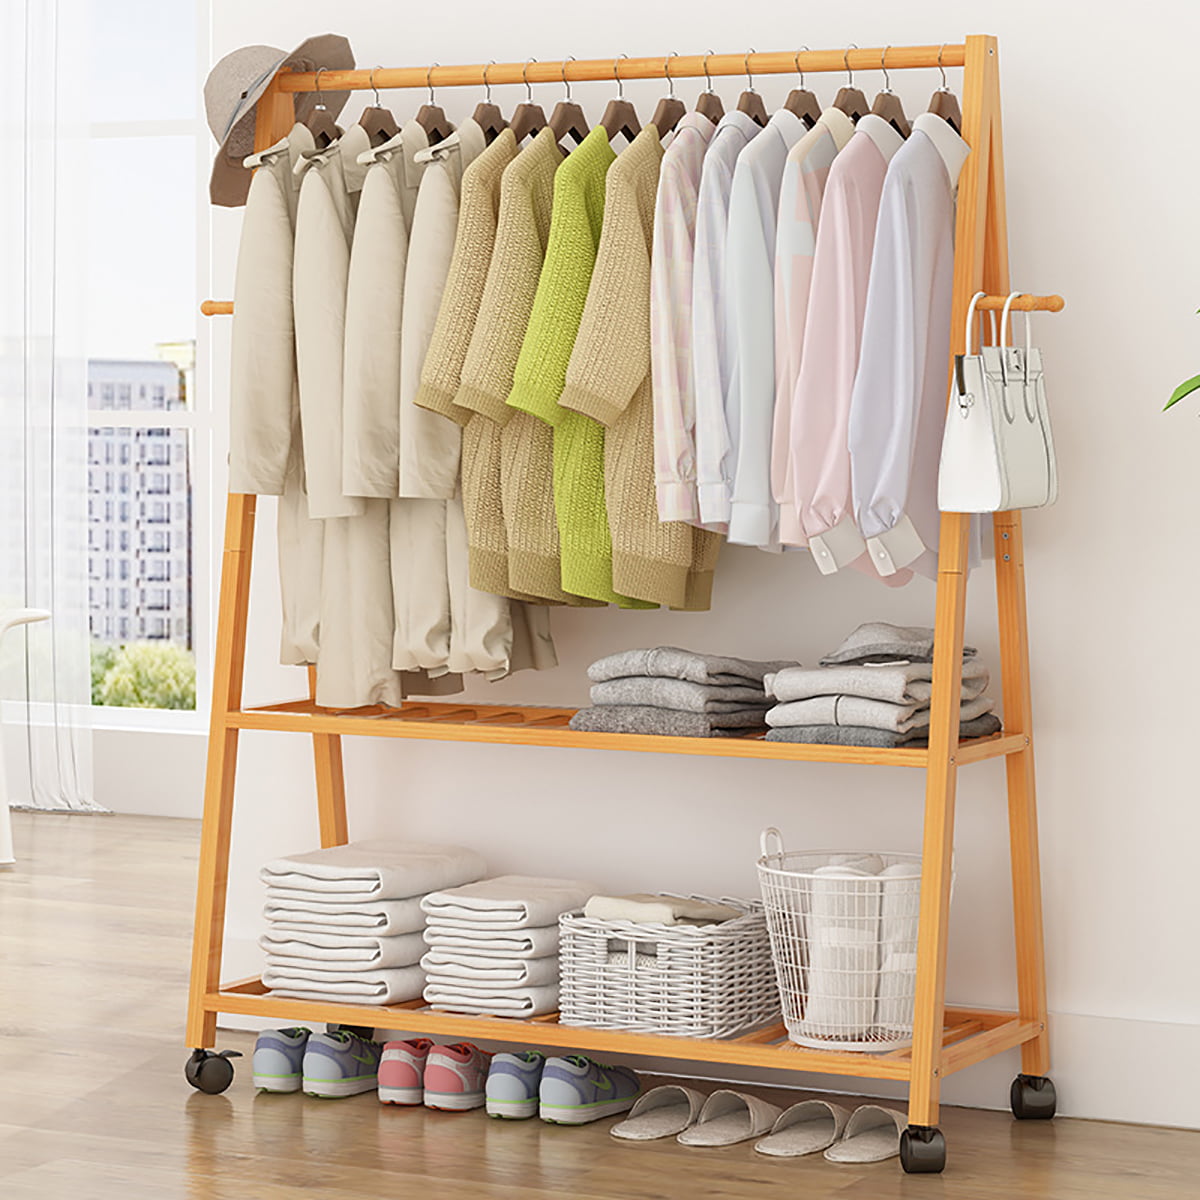 Wood Clothes Rack On Wheels Rolling Garment Rack With Tier Storage | My ...